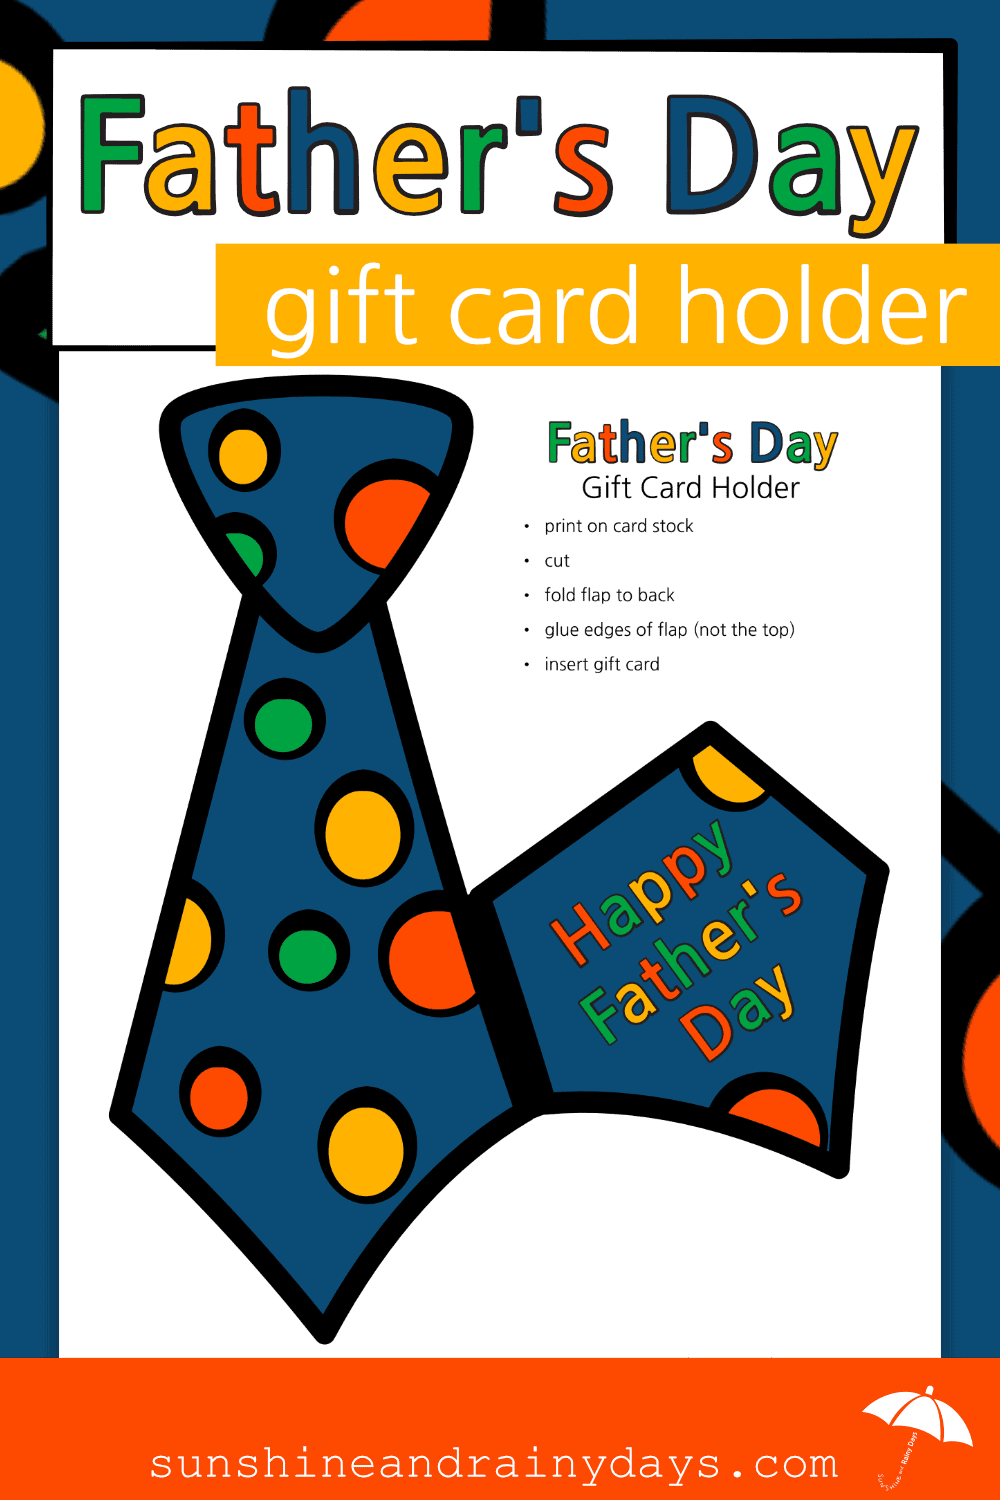 Father's Day Gift Card Holder Printable, shaped like a Tie!